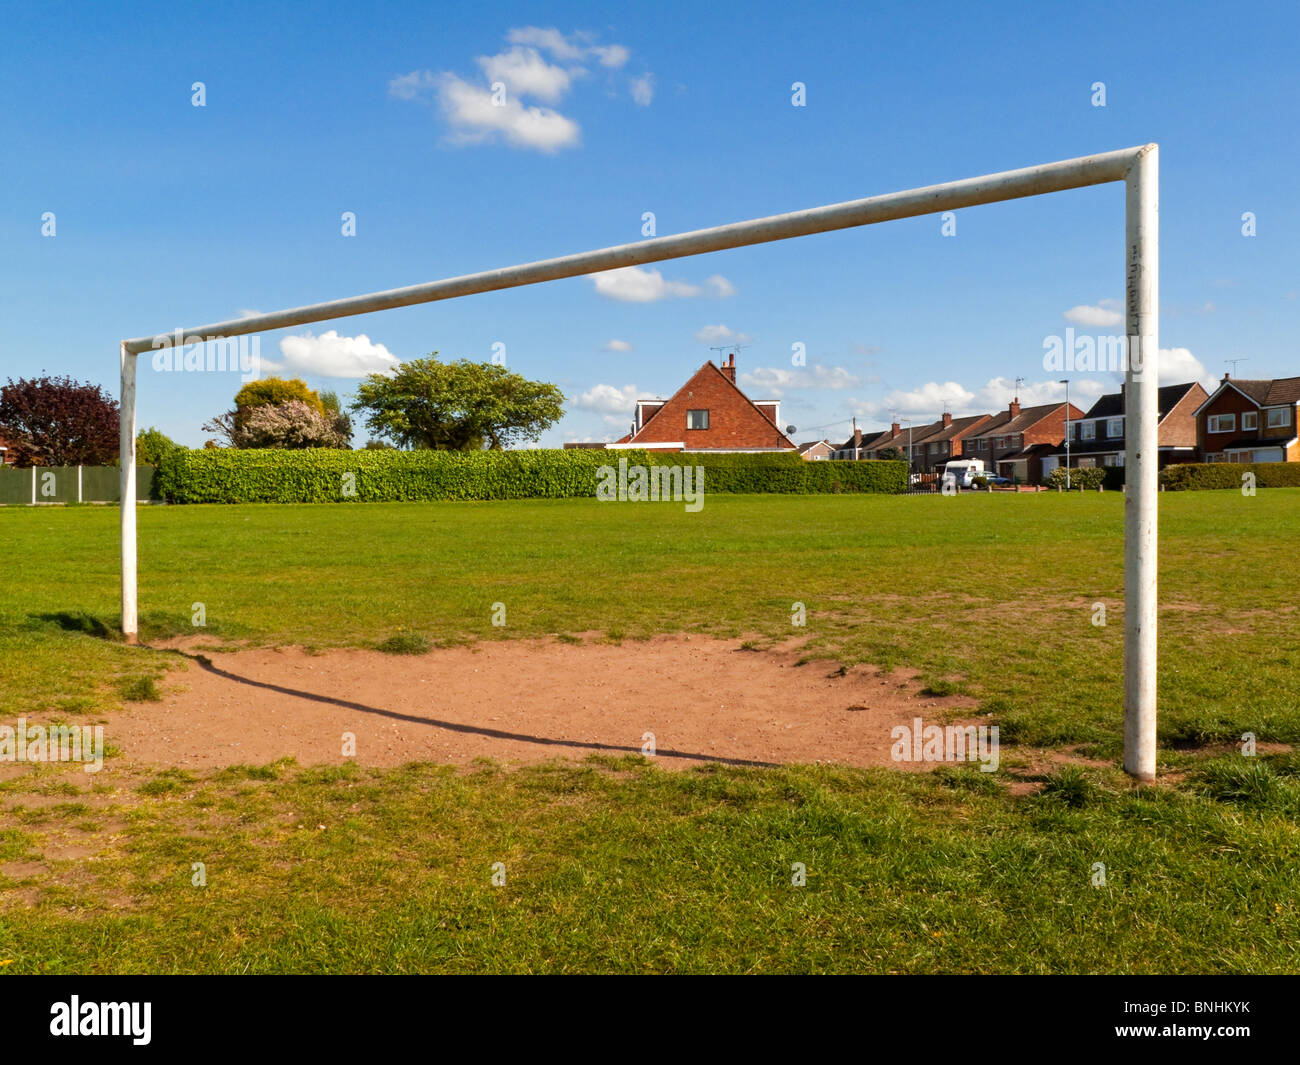 Goal posts on a football or soccer pitch in a suburban park with houses behind Stock Photo